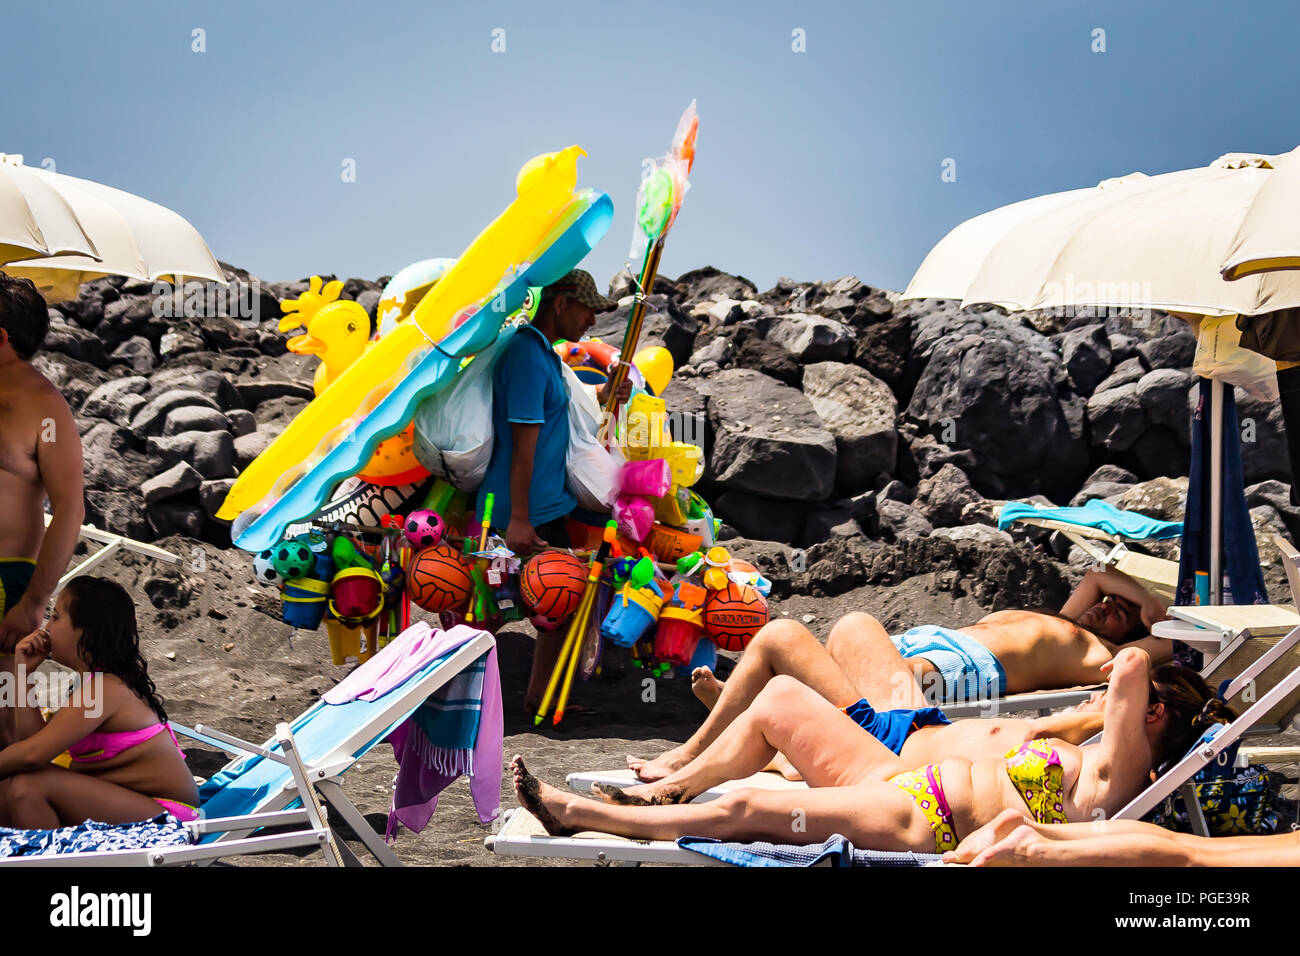 Torre del Greco, near Naples, Italy - June 3, 2018 - a man sells inflatable matresses and balls on a beach Stock Photo